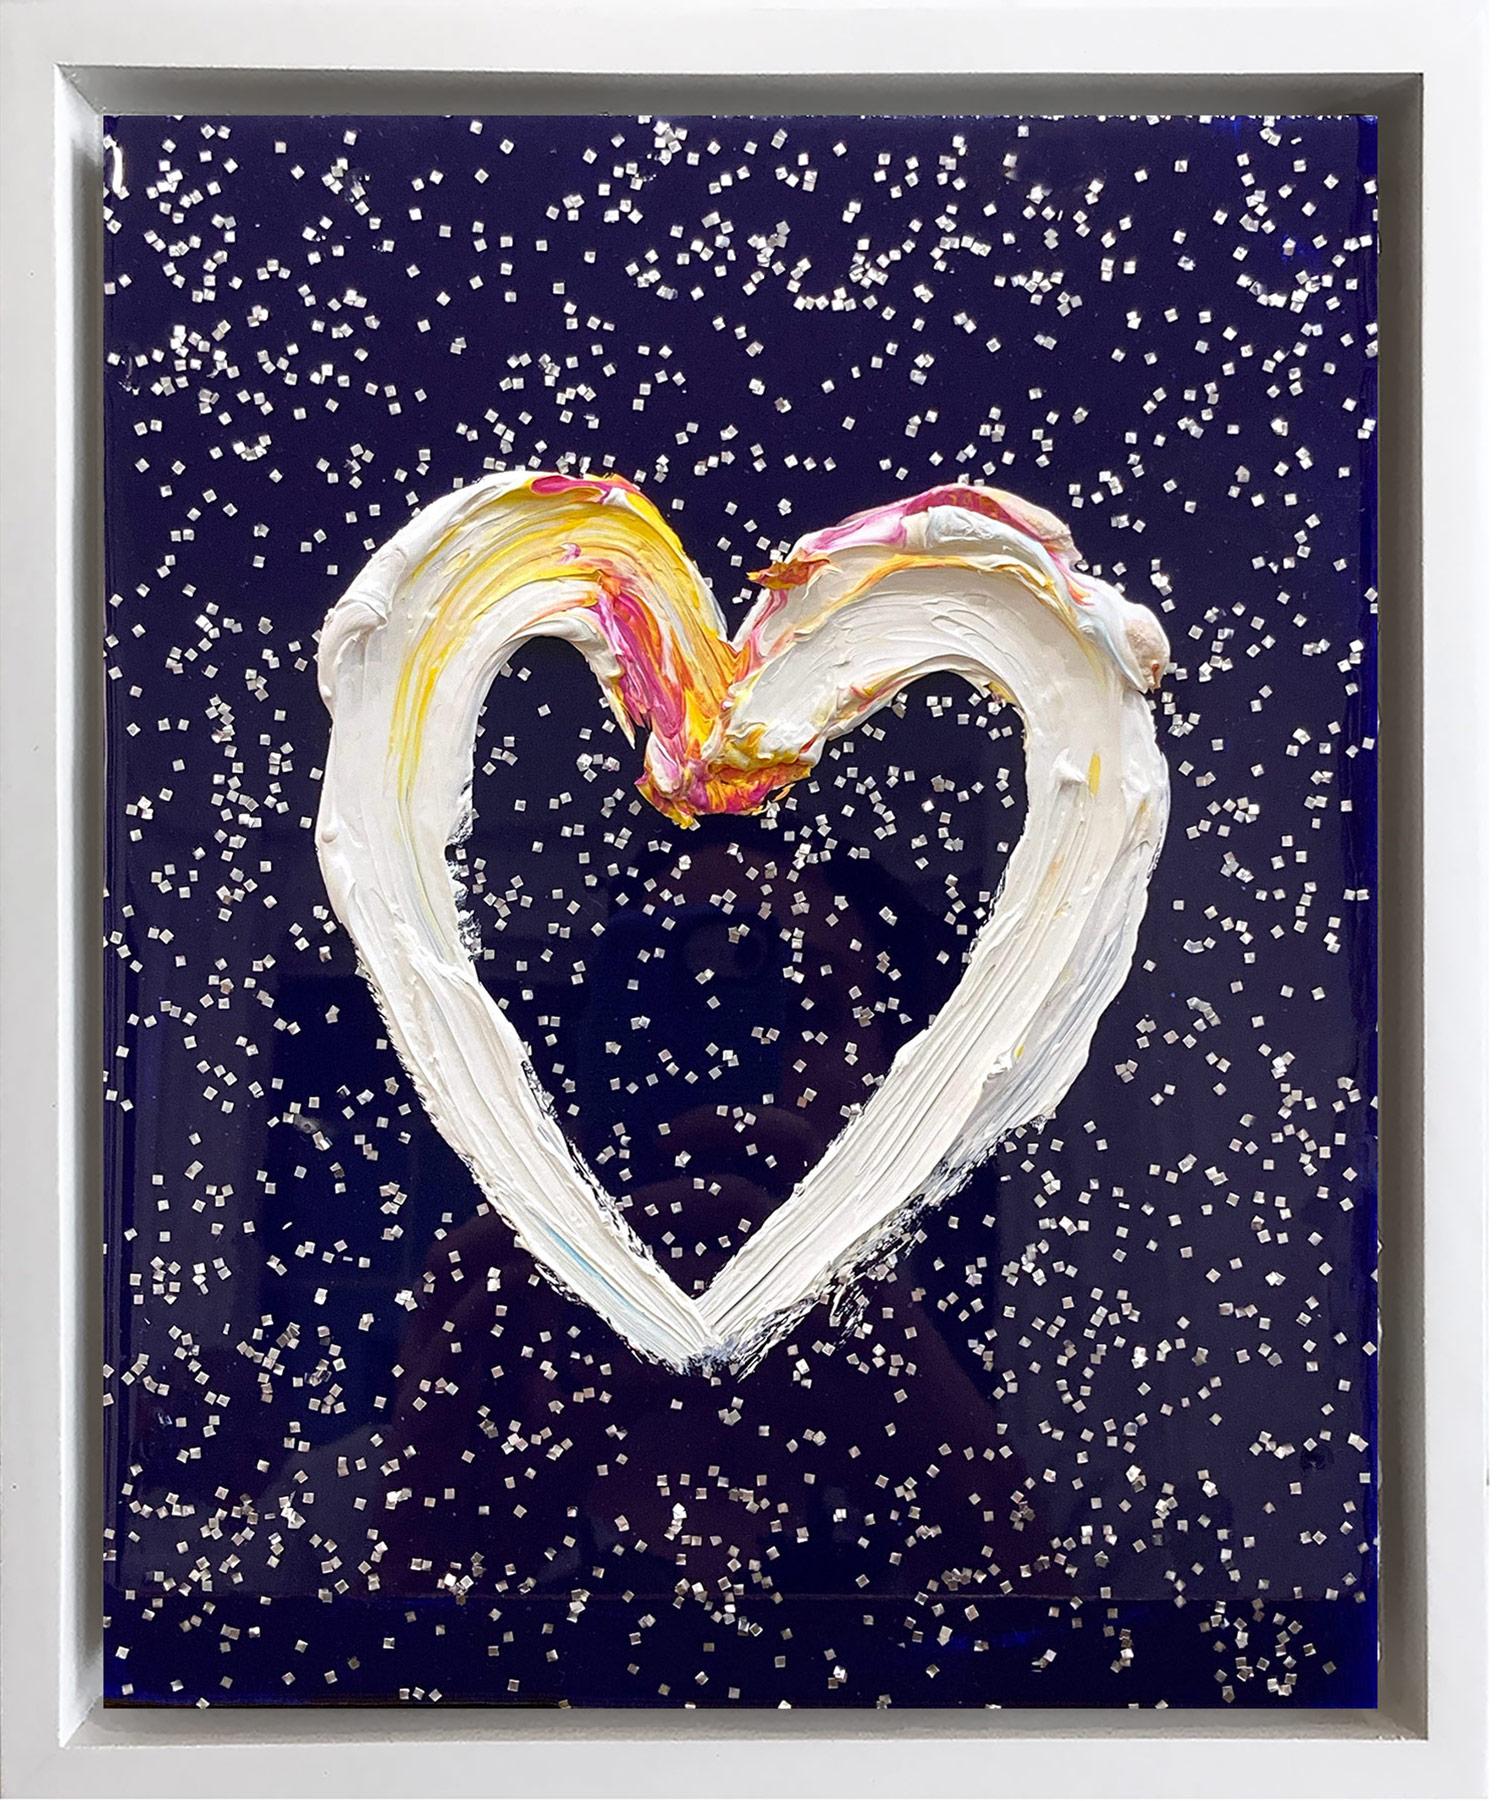 Cindy Shaoul Abstract Painting - "My Across the Universe Heart" Contemporary Pop Oil Painting with Floater Frame